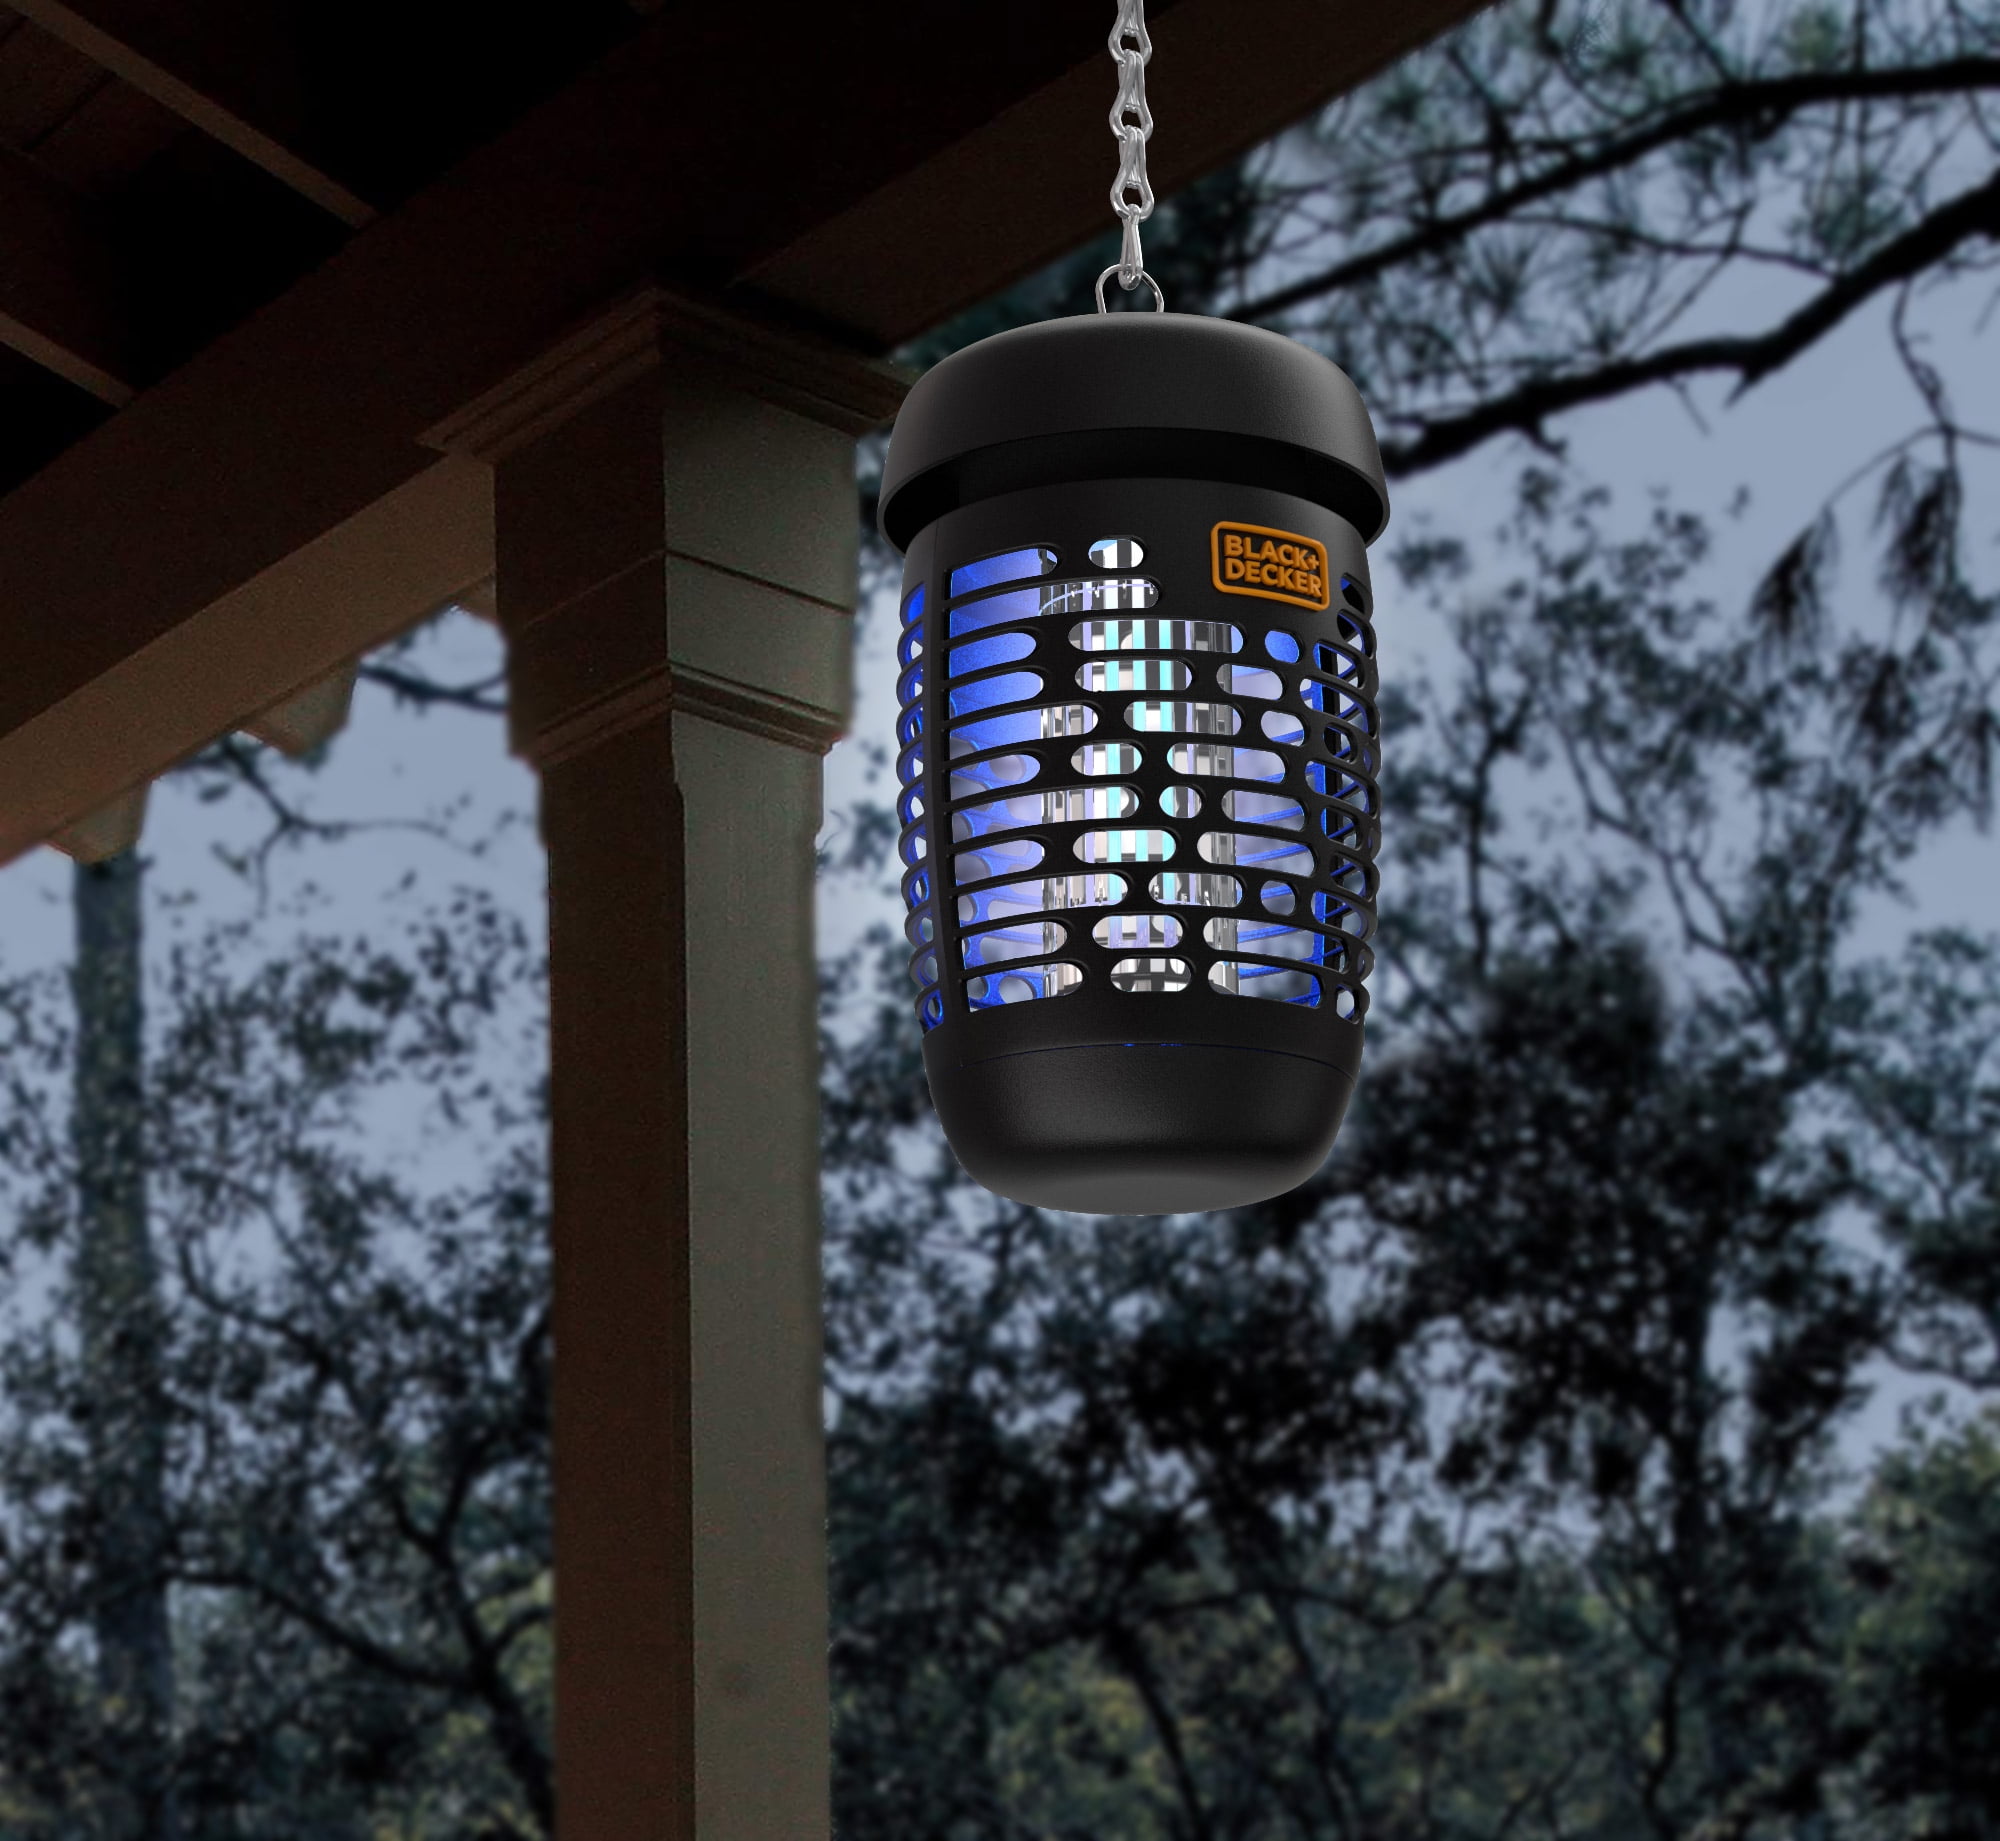 BLACK+DECKER Bug and Fly Zapper, Mosquito Attractant Killer and